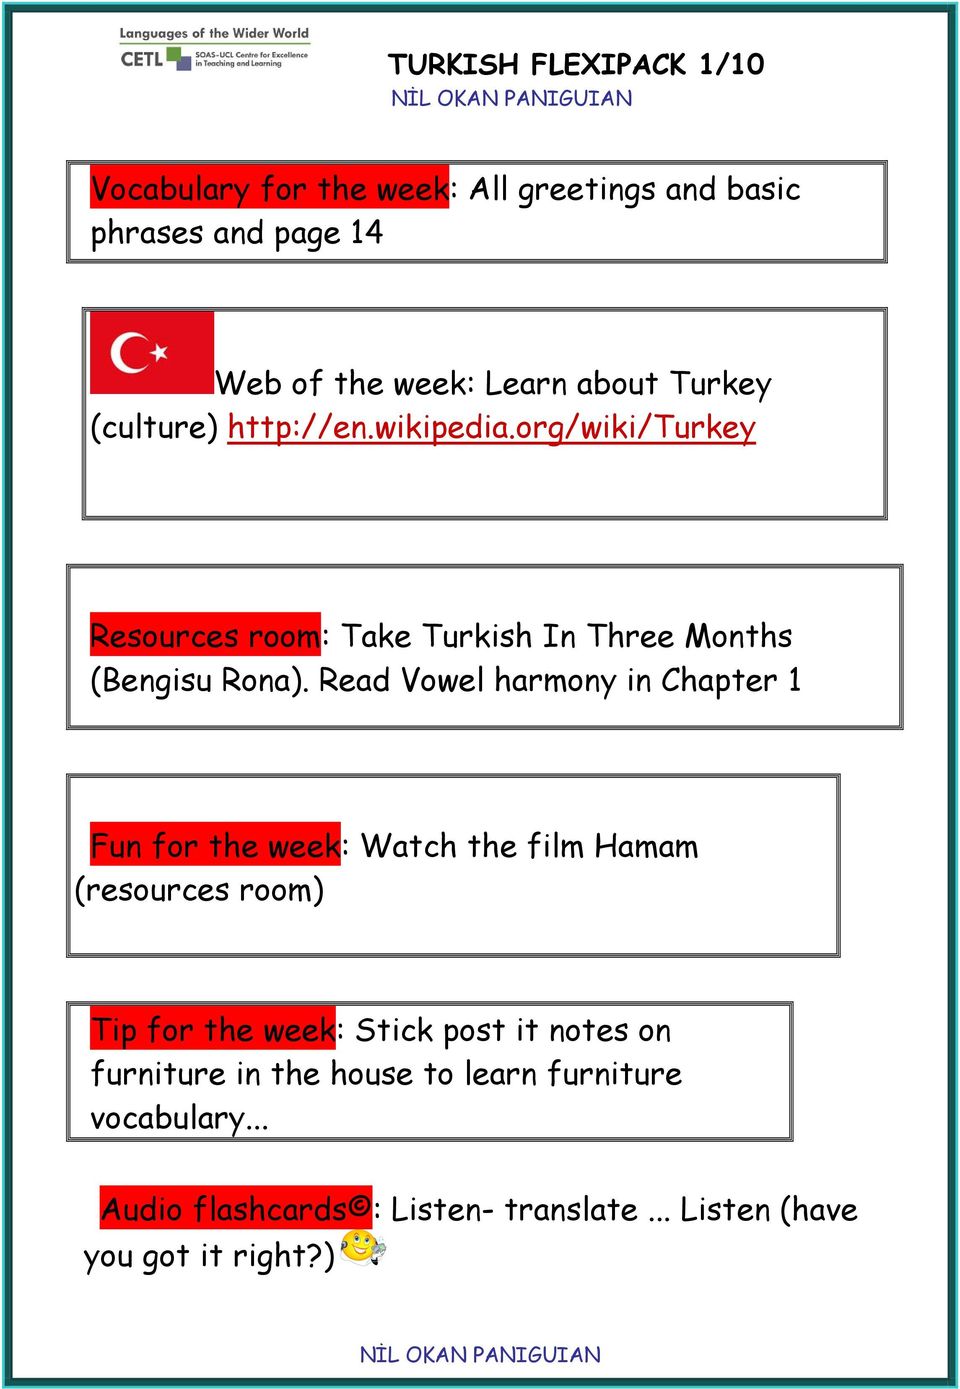 Read Vowel harmony in Chapter 1 Fun for the week: Watch the film Hamam (resources room) Tip for the week: Stick post